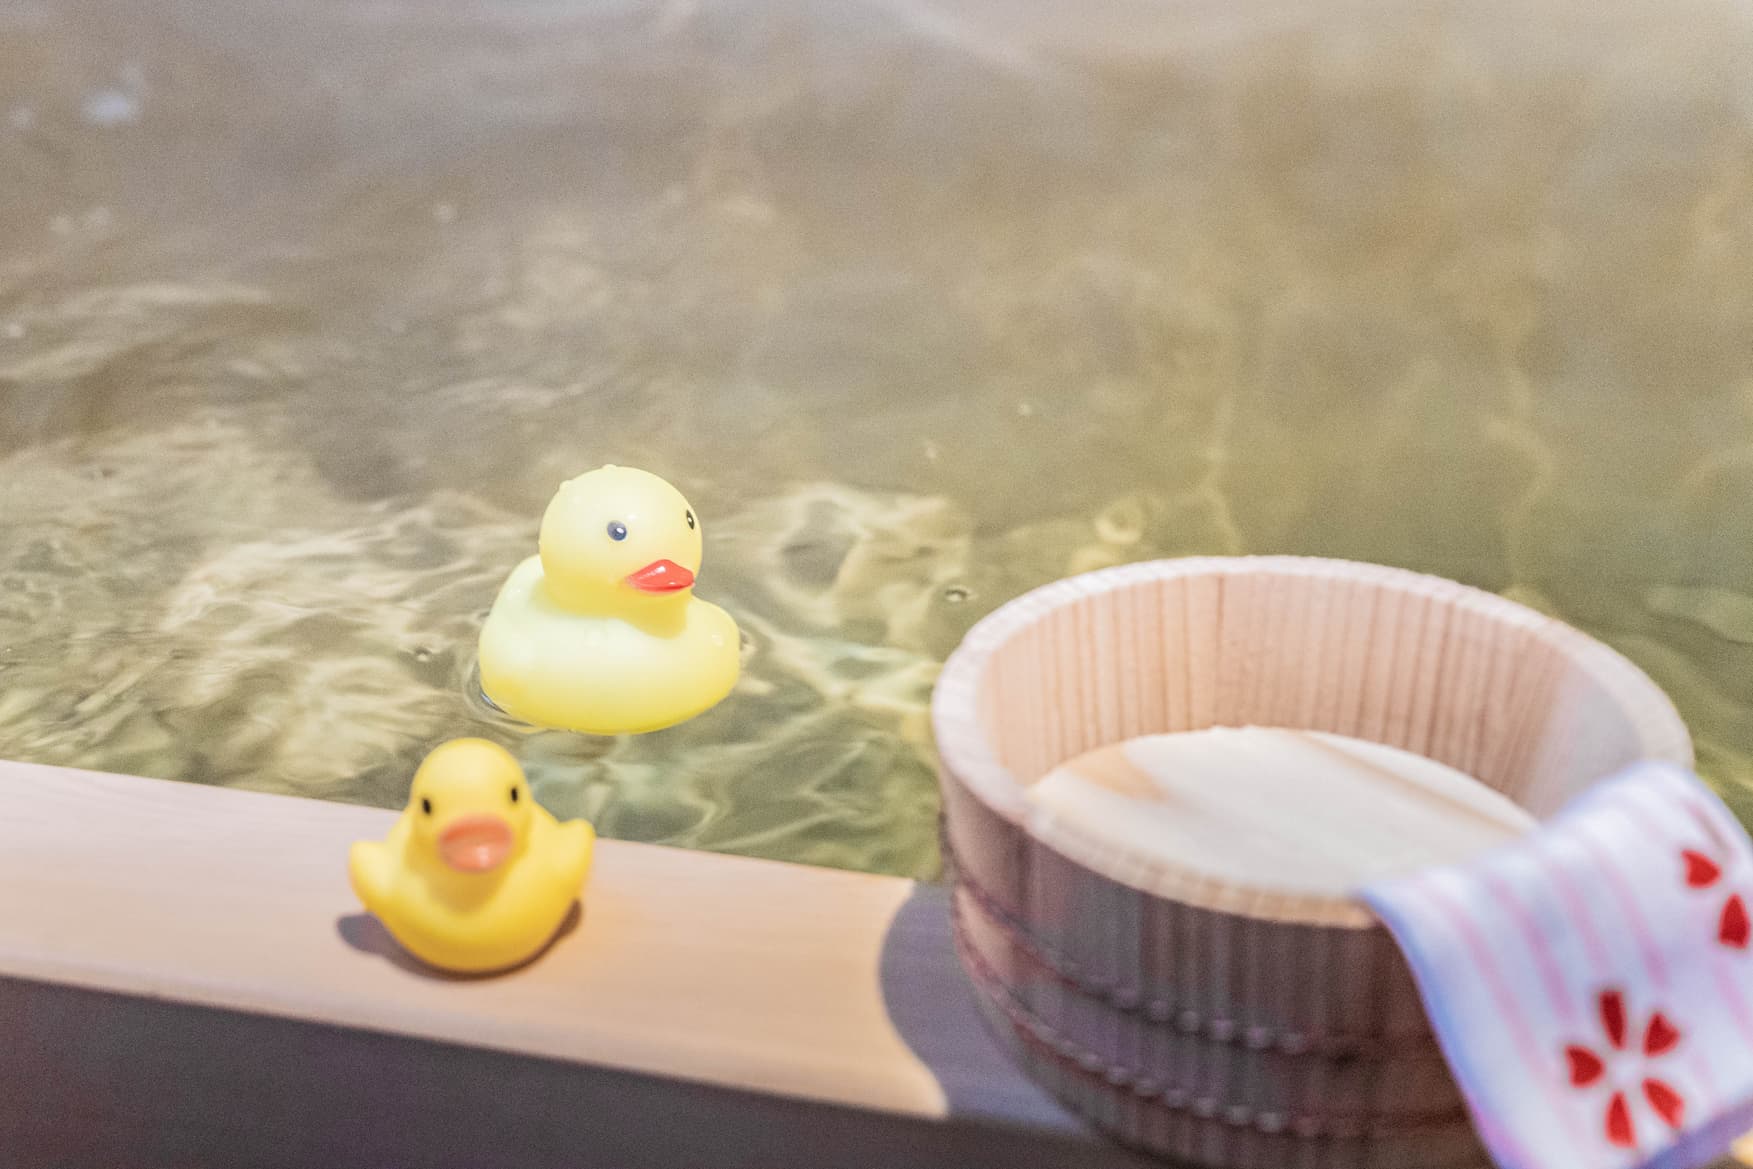 Did you know? We have Onsen (hot springs) in the US!